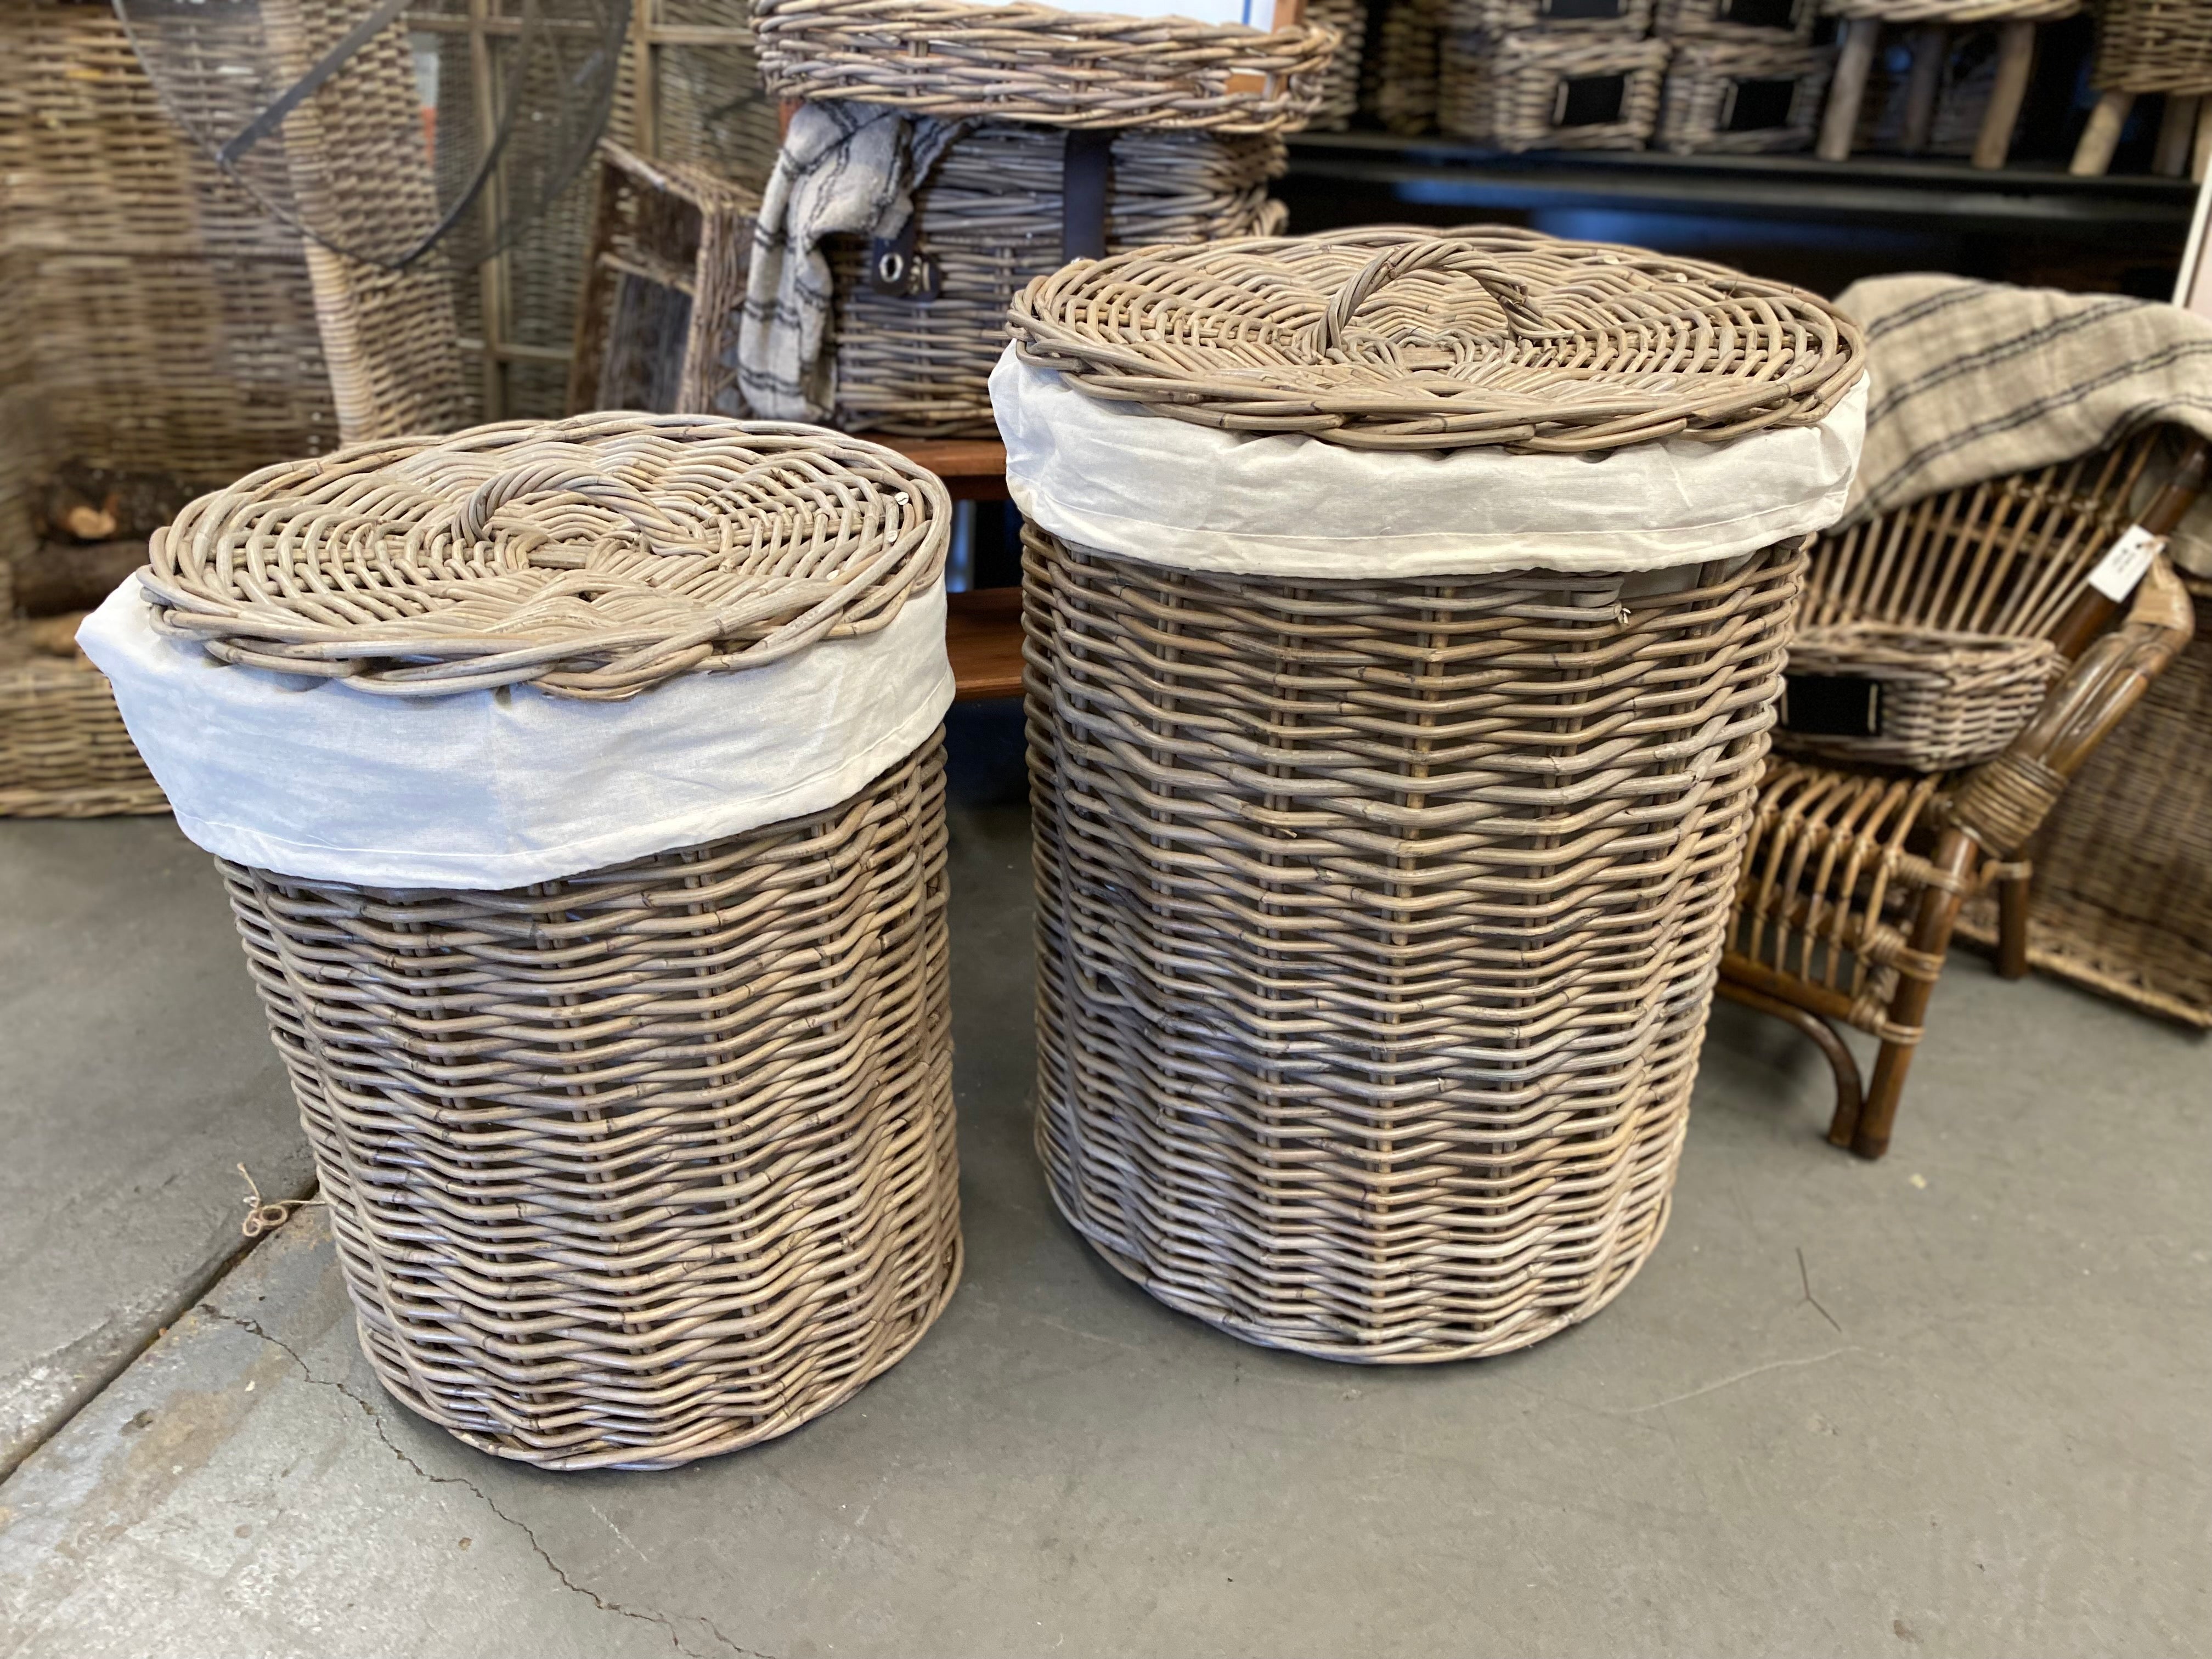 Round Rattan LINED Laundry Hamper With LID